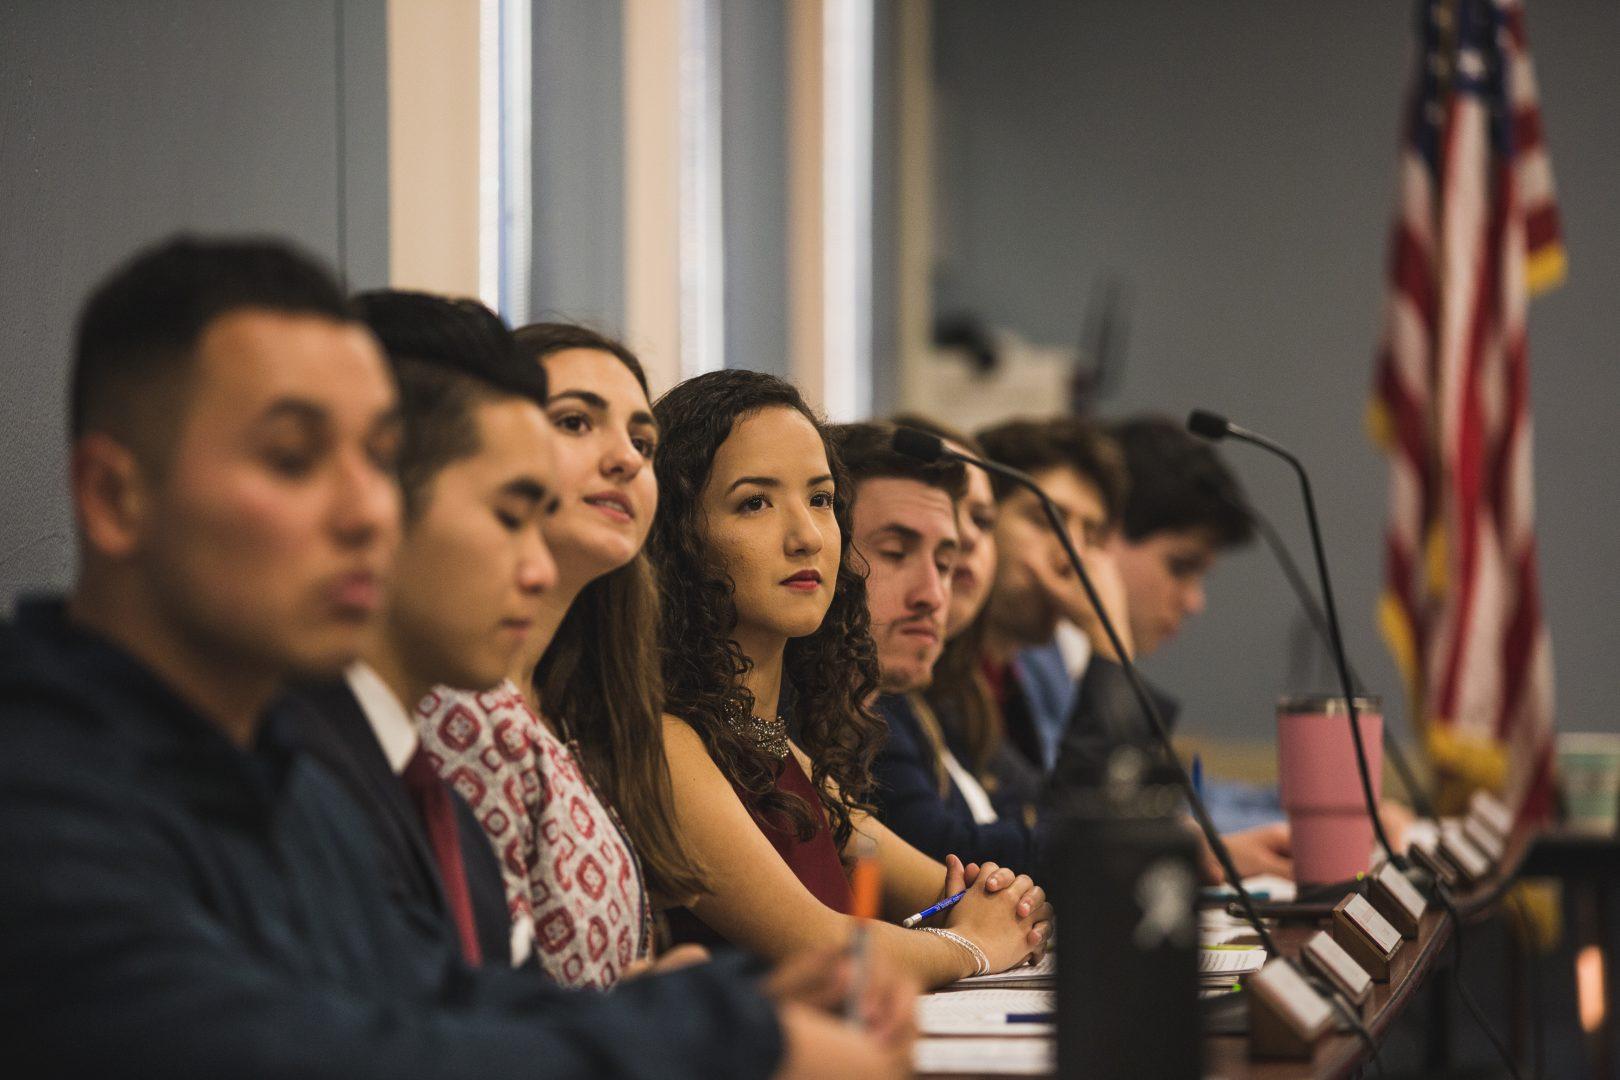 Associated Students Inc. senators at the Nov. 29, 2017. At the meeting, free testing materials, Adobe Creative Cloud and examining senator positions were discussed. (Alejandro Soto/The Collegian)